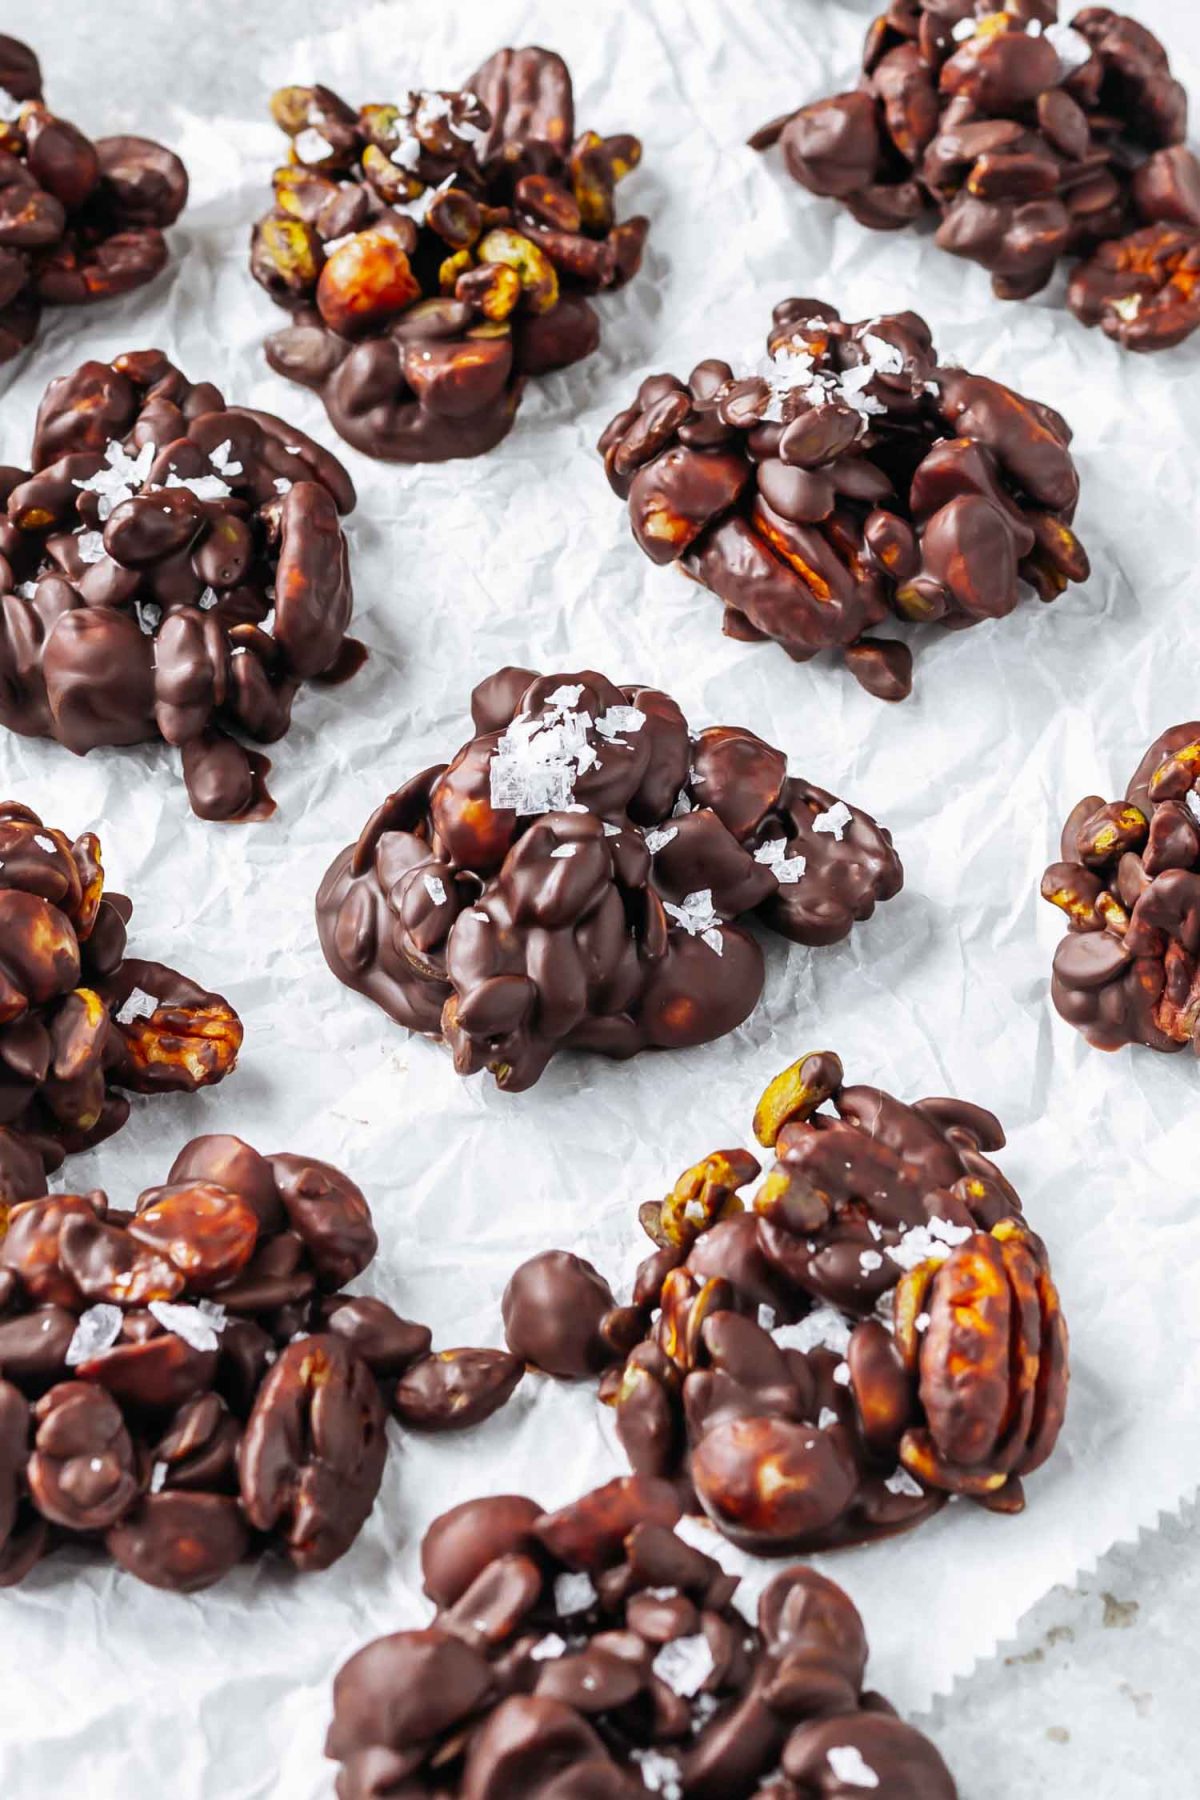 Keto Chocolate Fat Bomb Nut Clusters